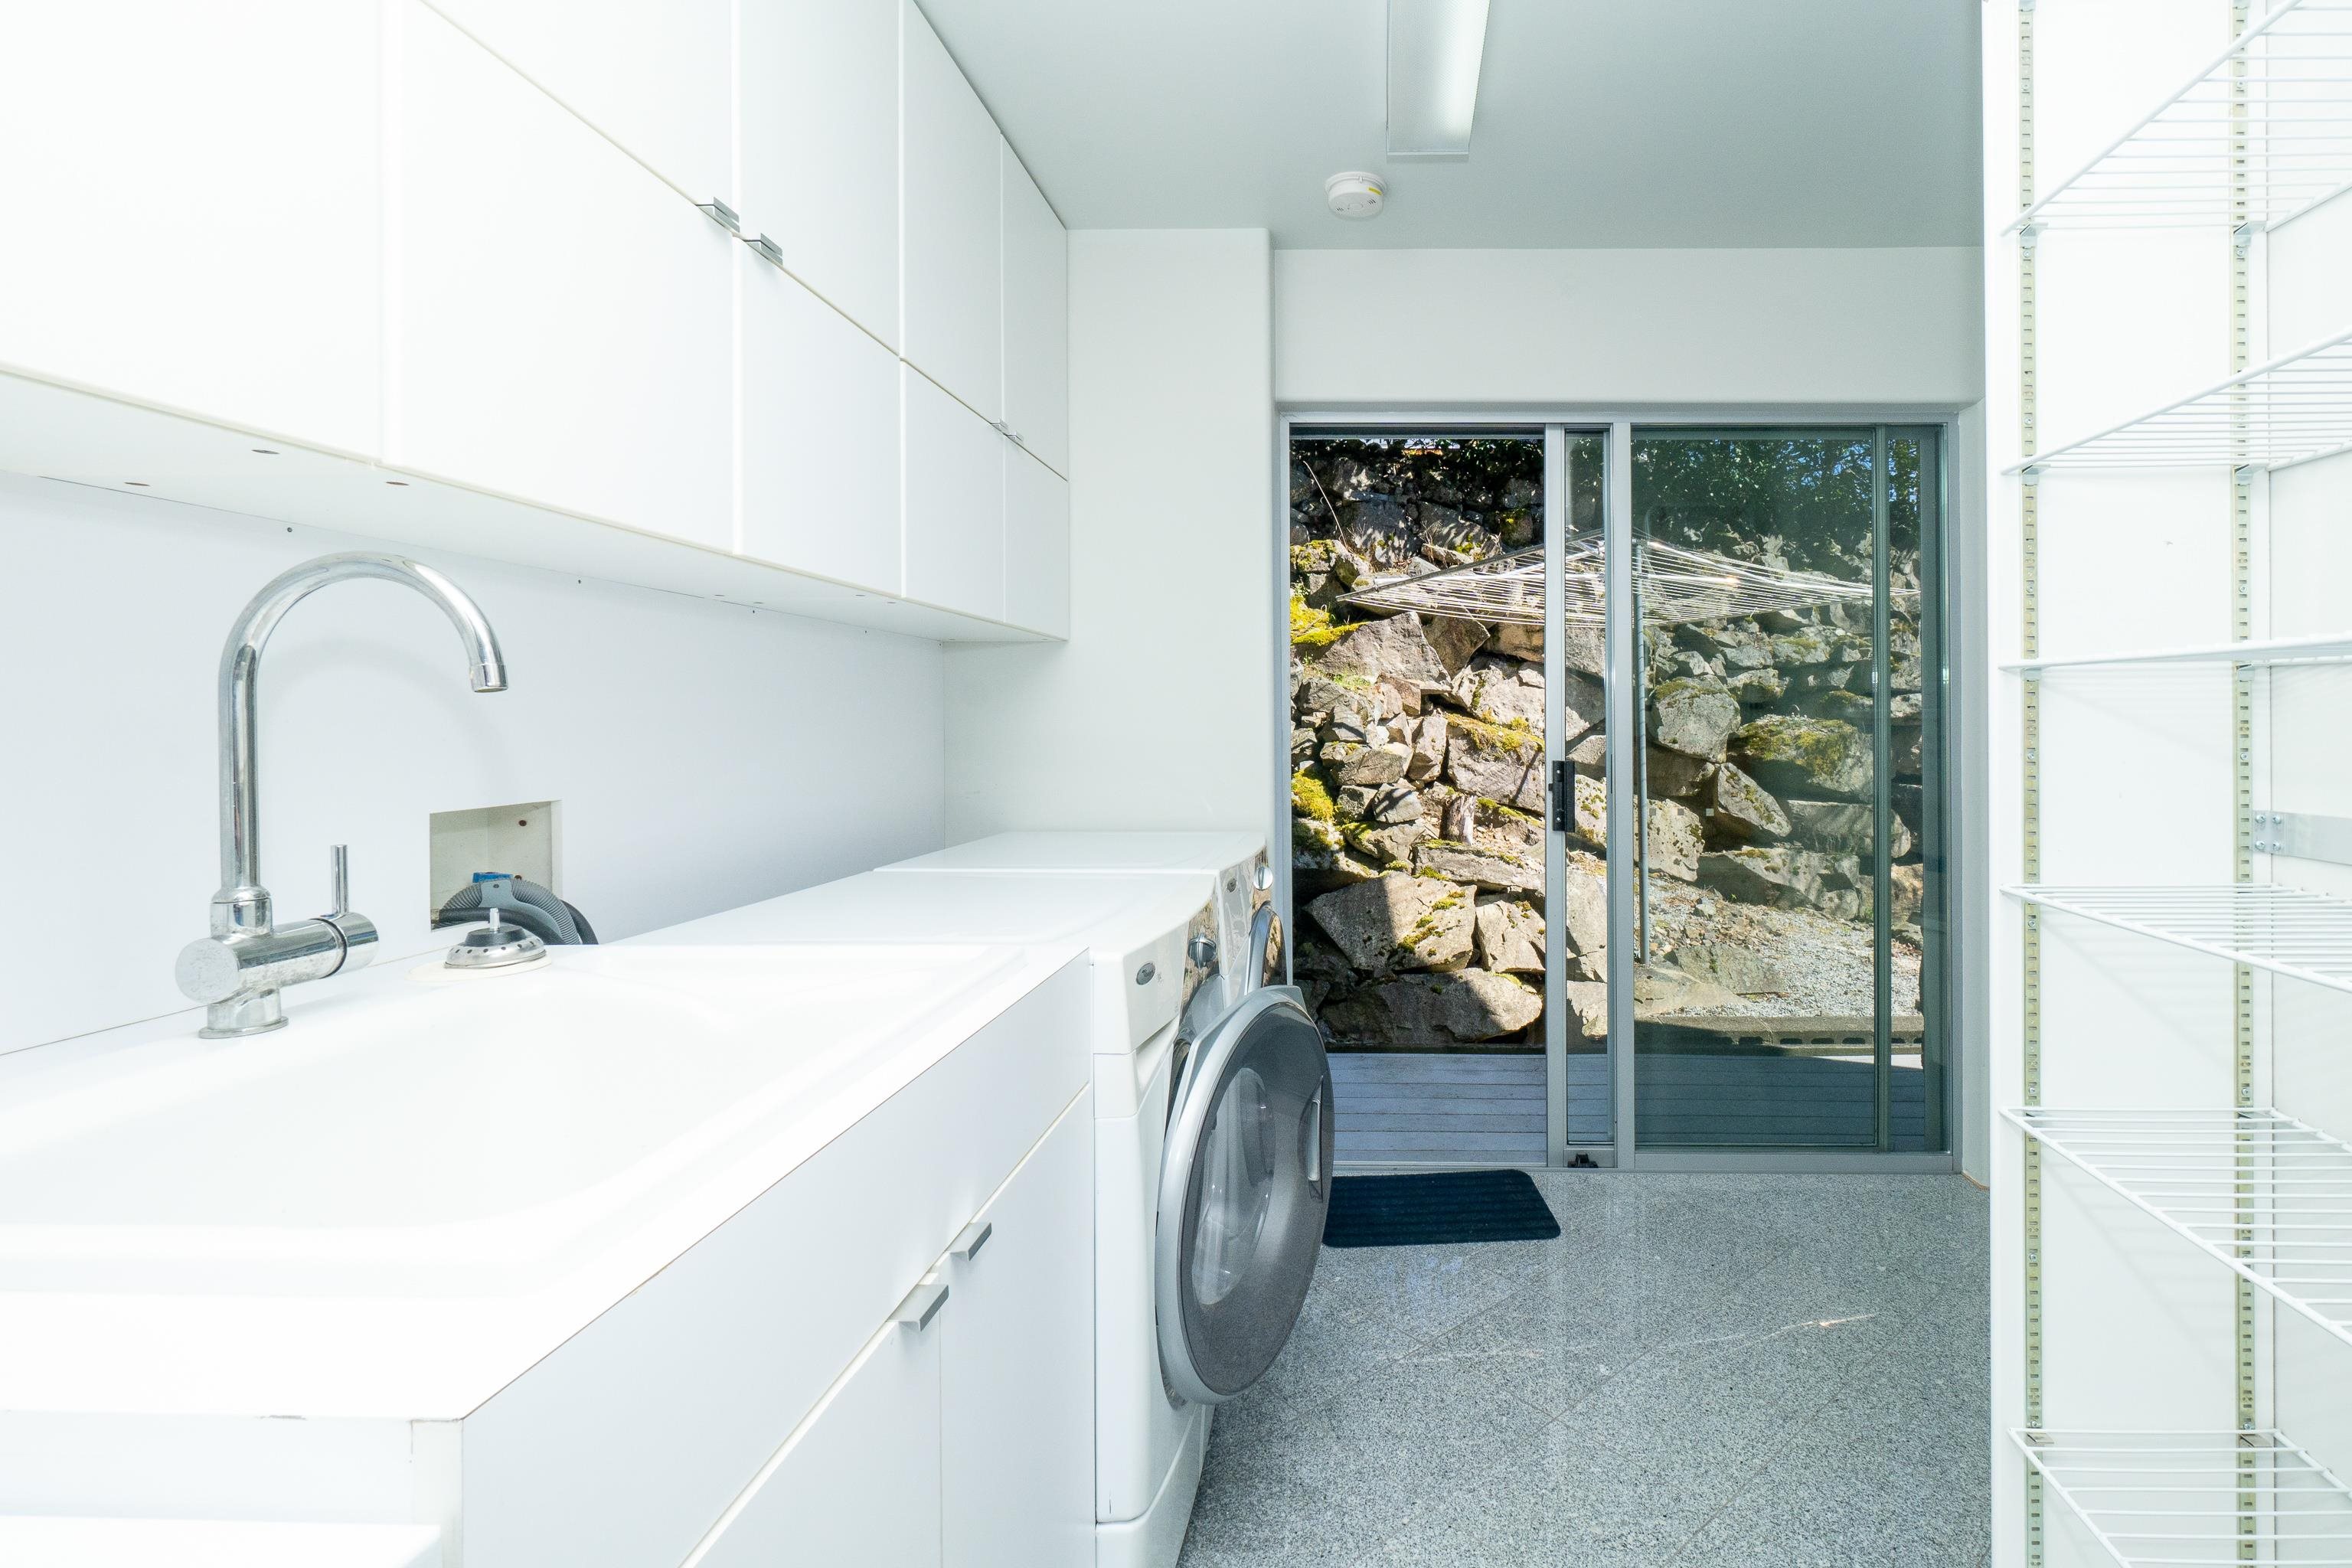 This room situated off the kitchen features storage, a extra fridge and freezer as well as laundry and drying area. There is a laundry shoot from the primary bedroom walk in closet that shoots right into a basket in this room for a easy laundry day